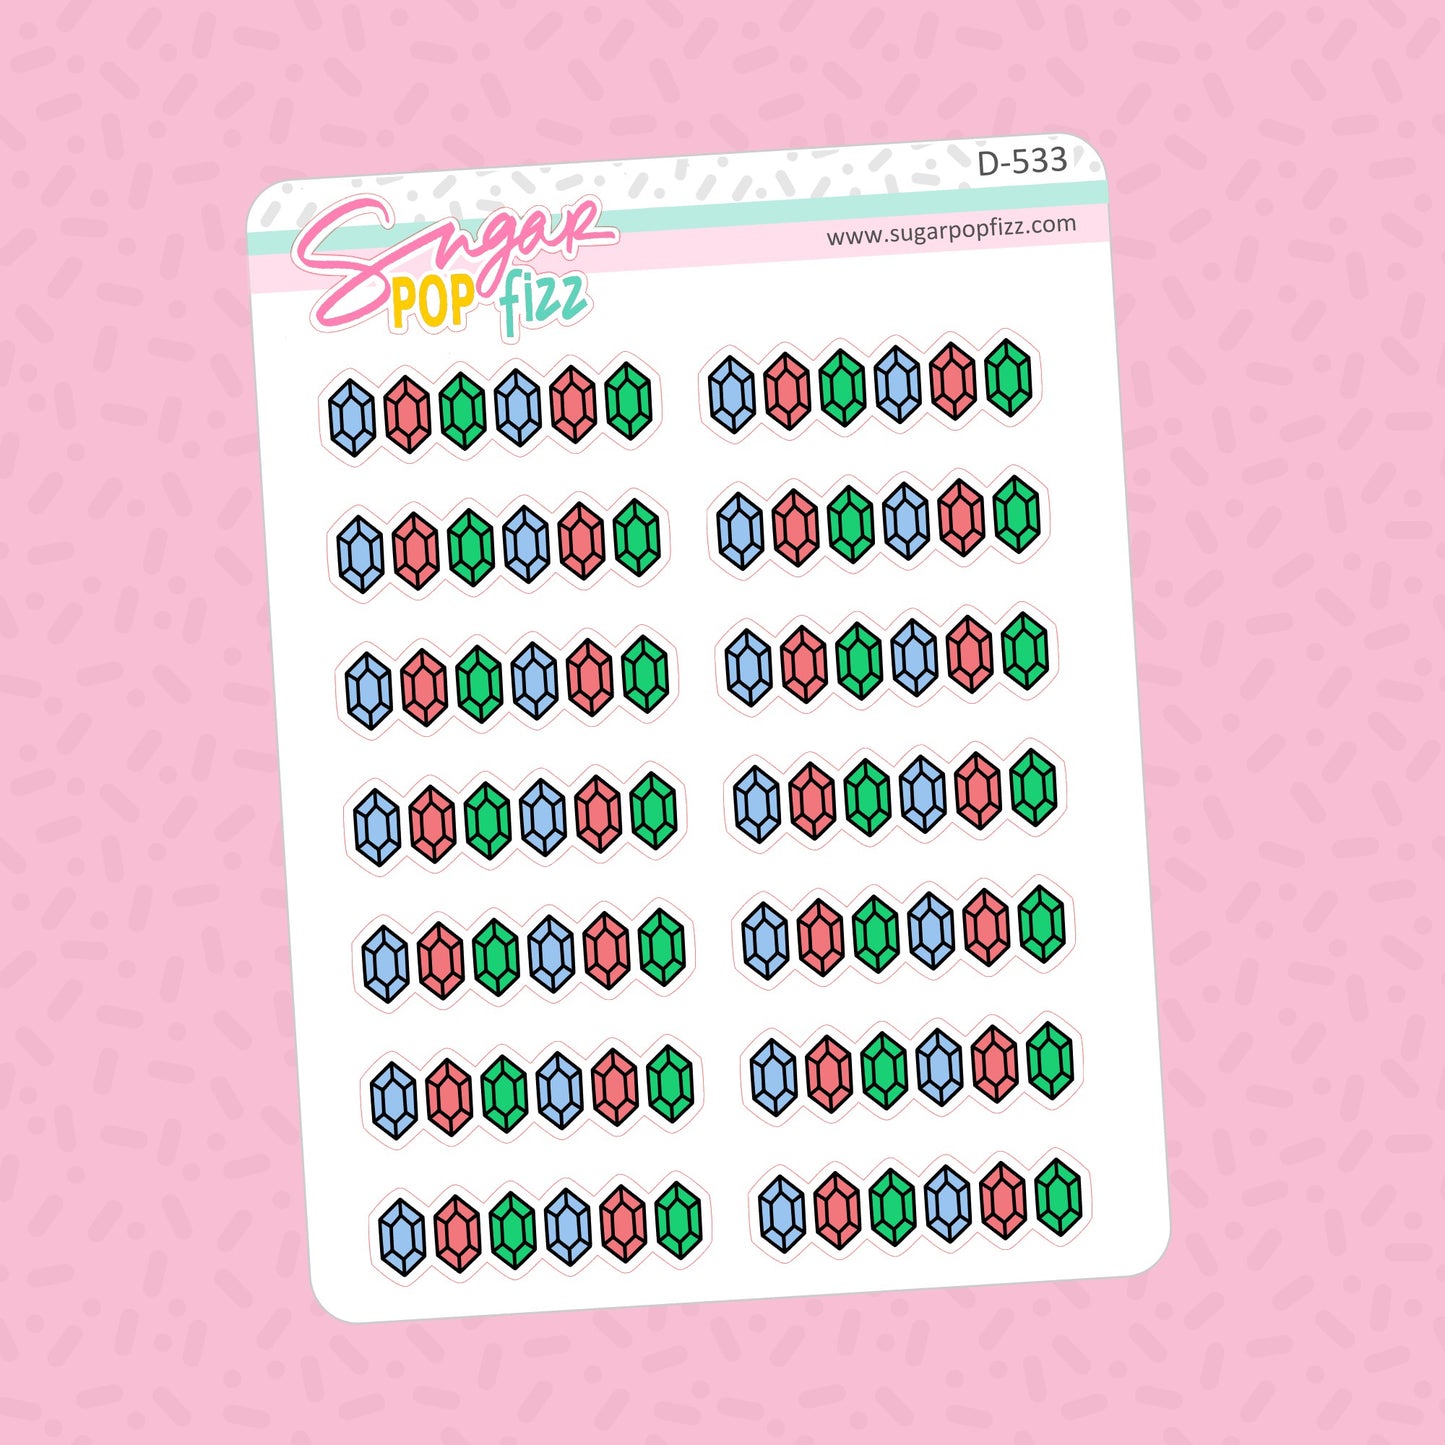 Rupees Divider Doodle Stickers - D533